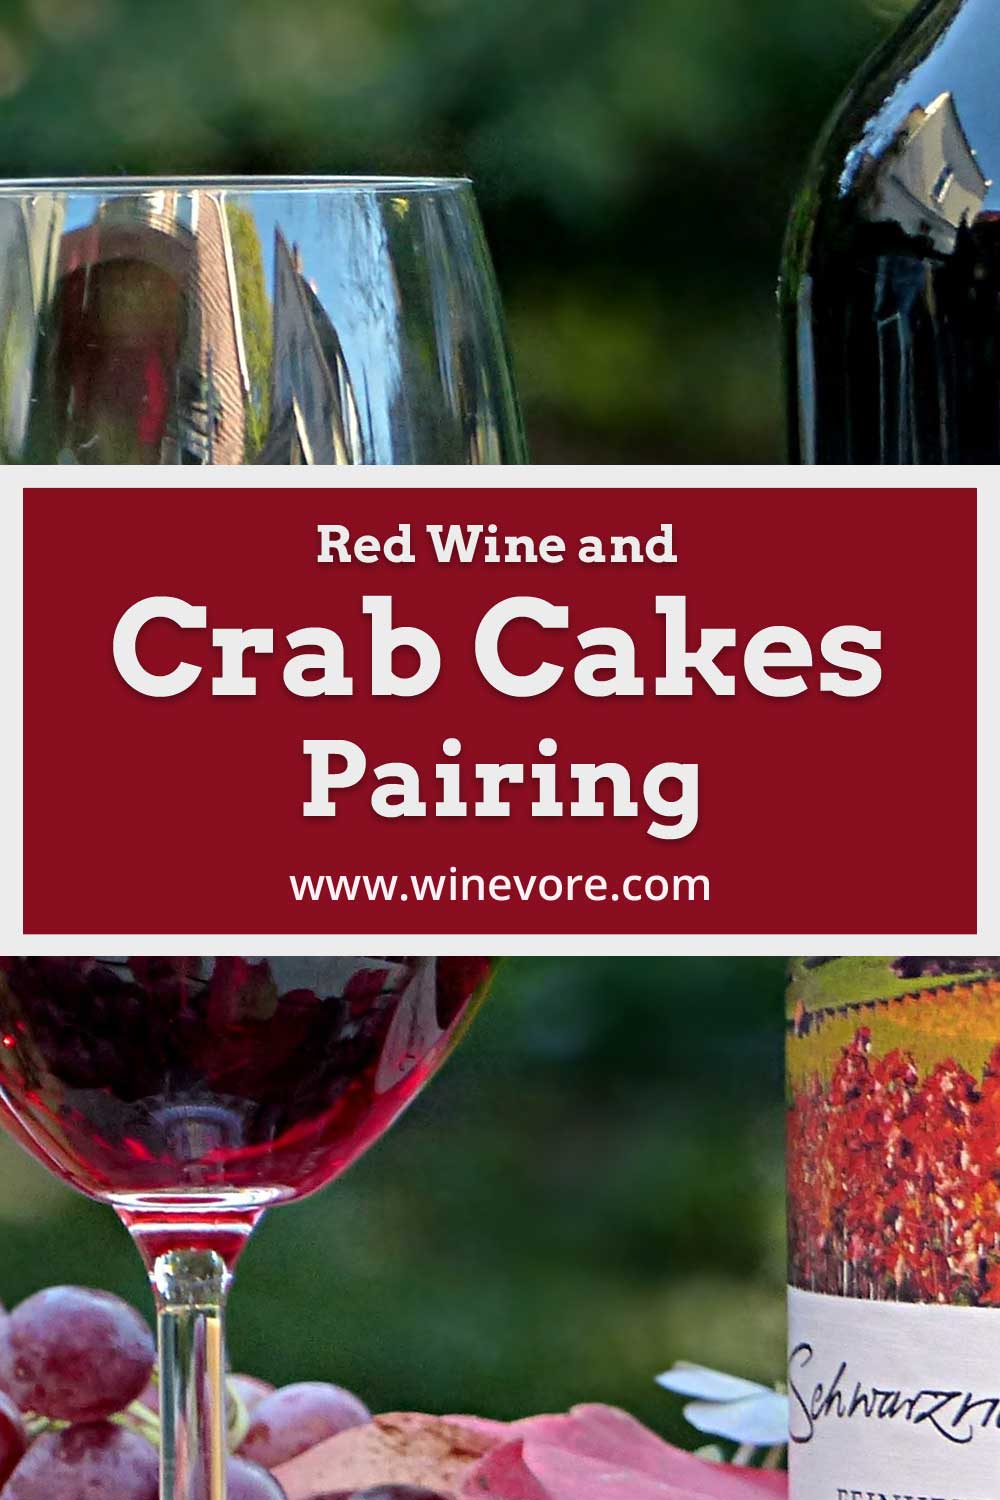 Wine glass and a wine bottle - Red Wine and Crab Cakes Pairing.